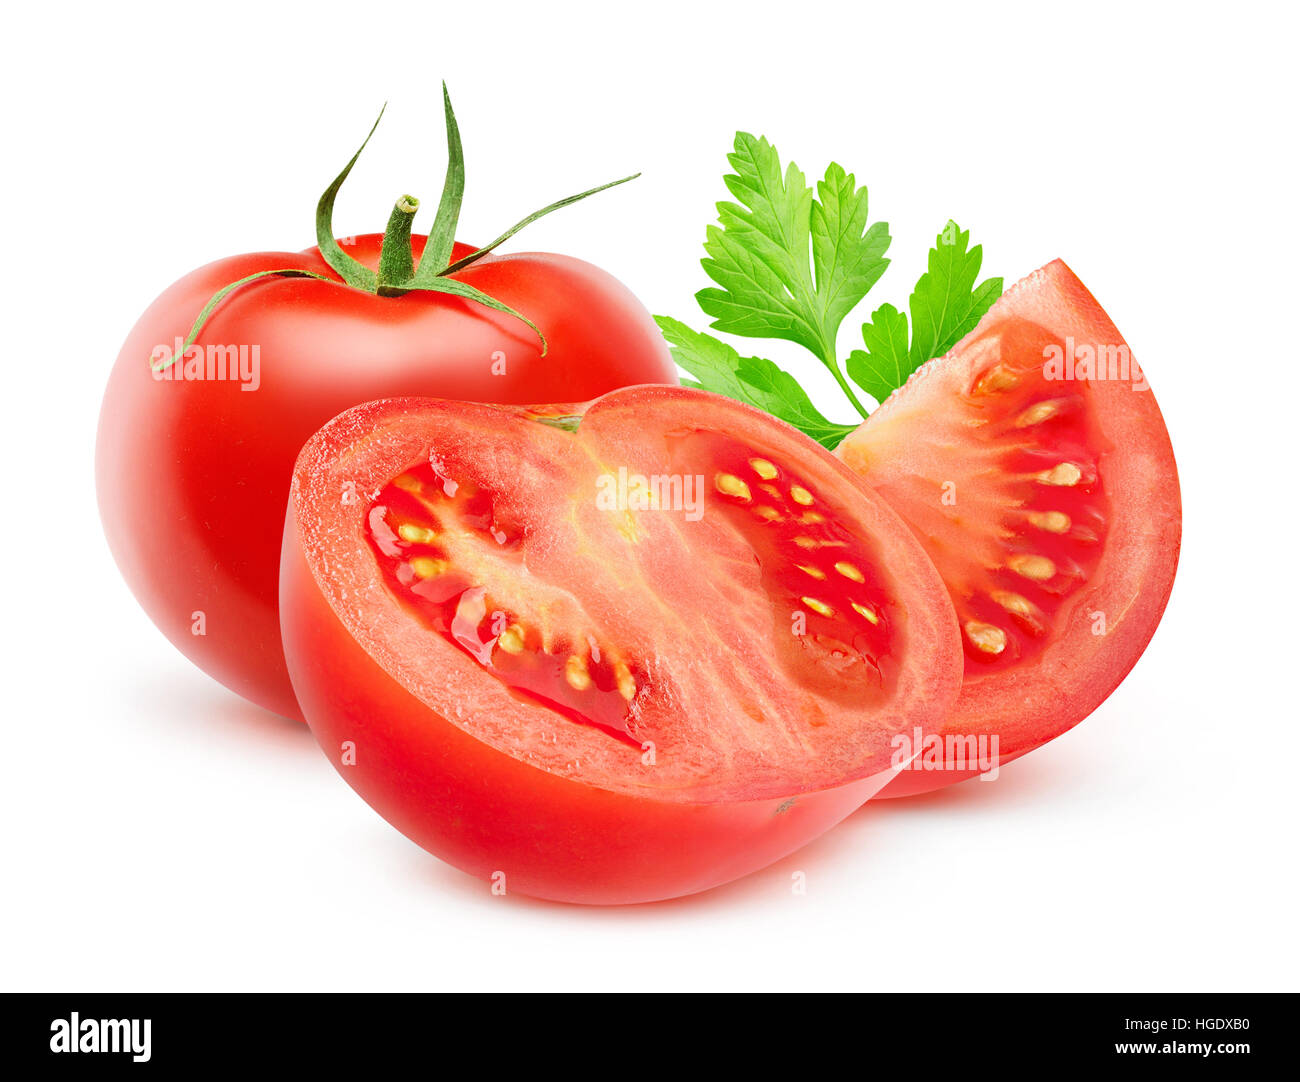 Isolated tomato. Whole and cut fresh tomatoes isolated on white background with clipping path Stock Photo